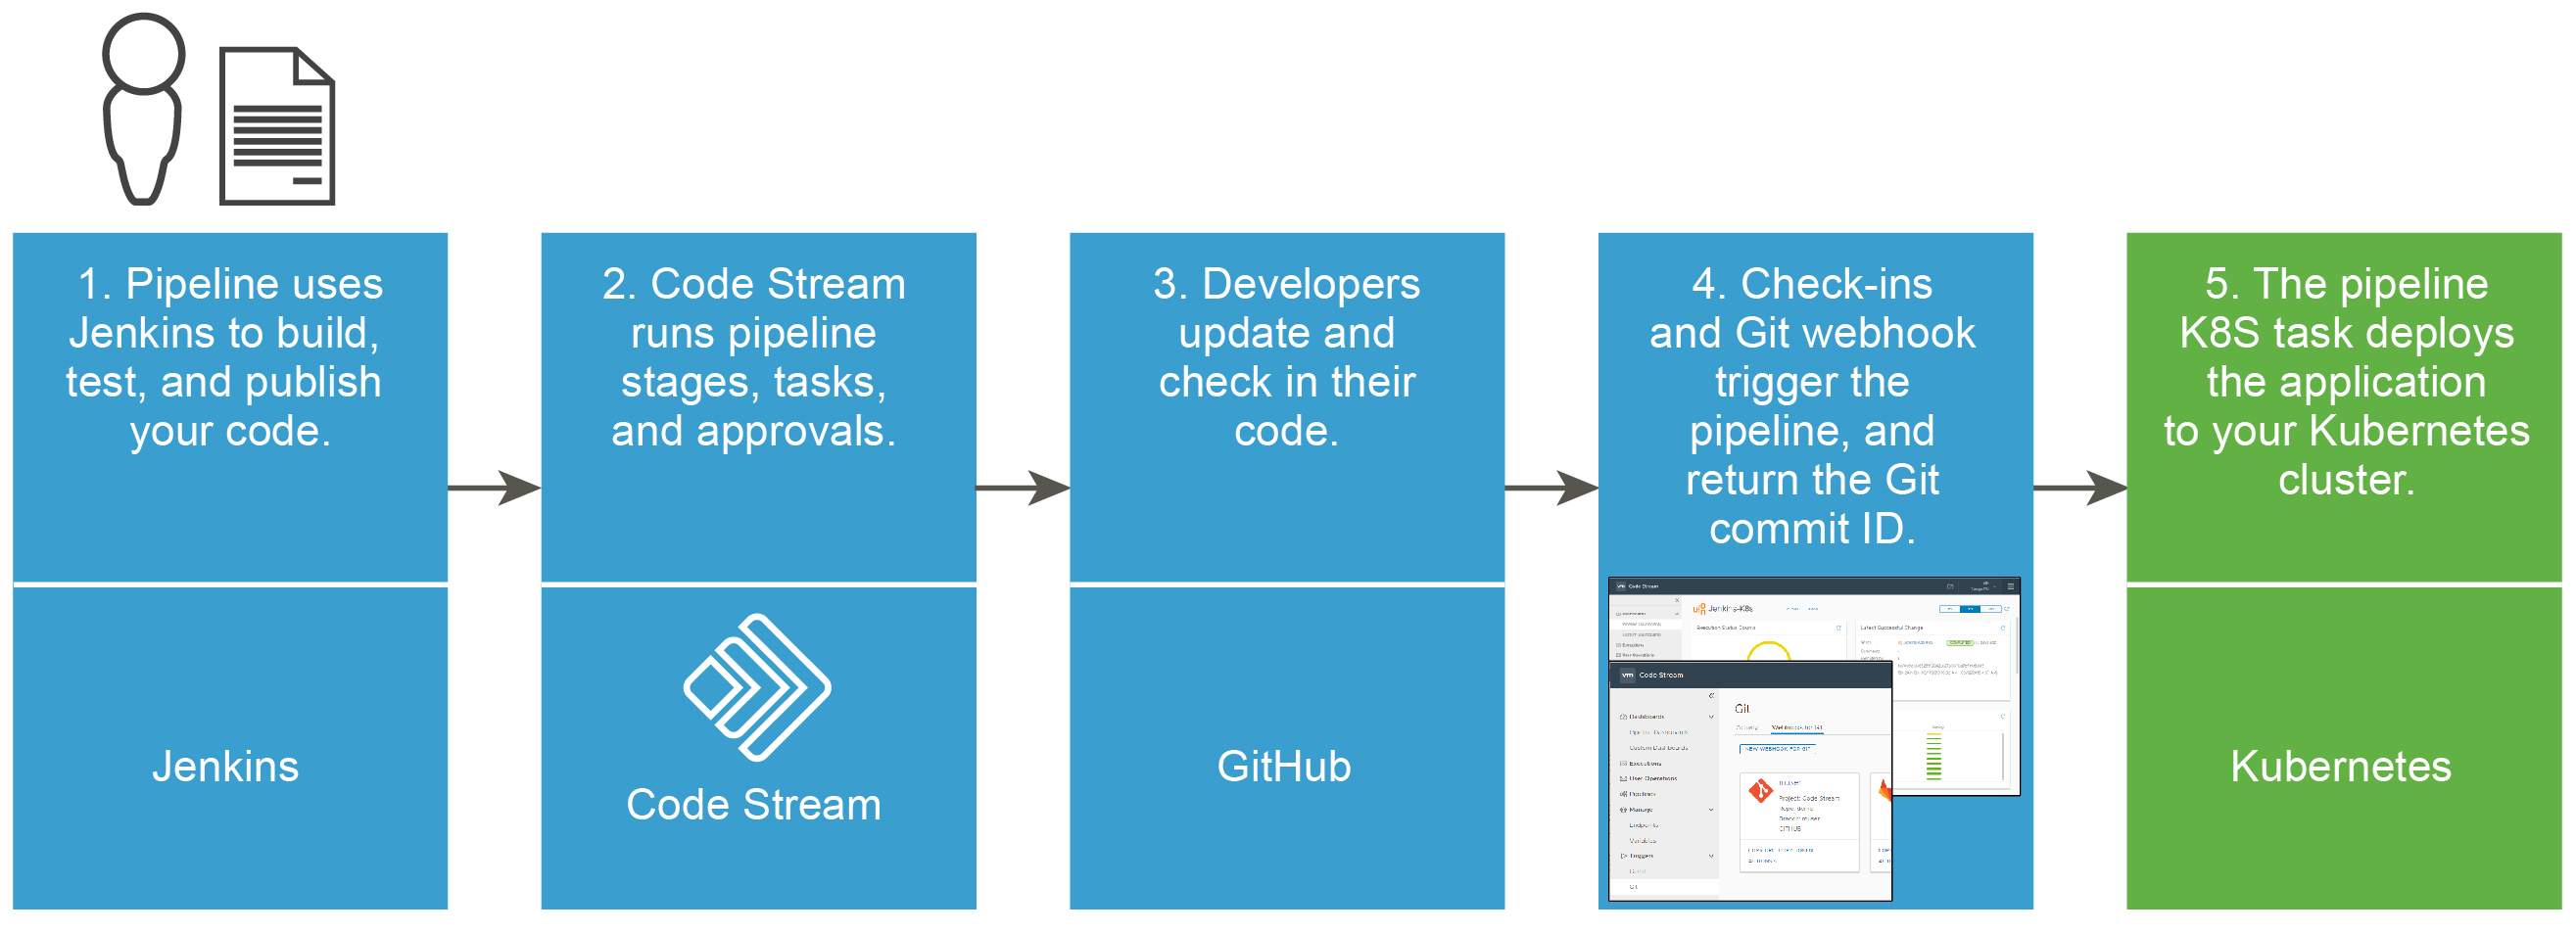 The workflow that deploys an application to a Kubernetes cluster uses Jenkins, Code Stream, GitHub, the trigger for Git, and Kubernetes.